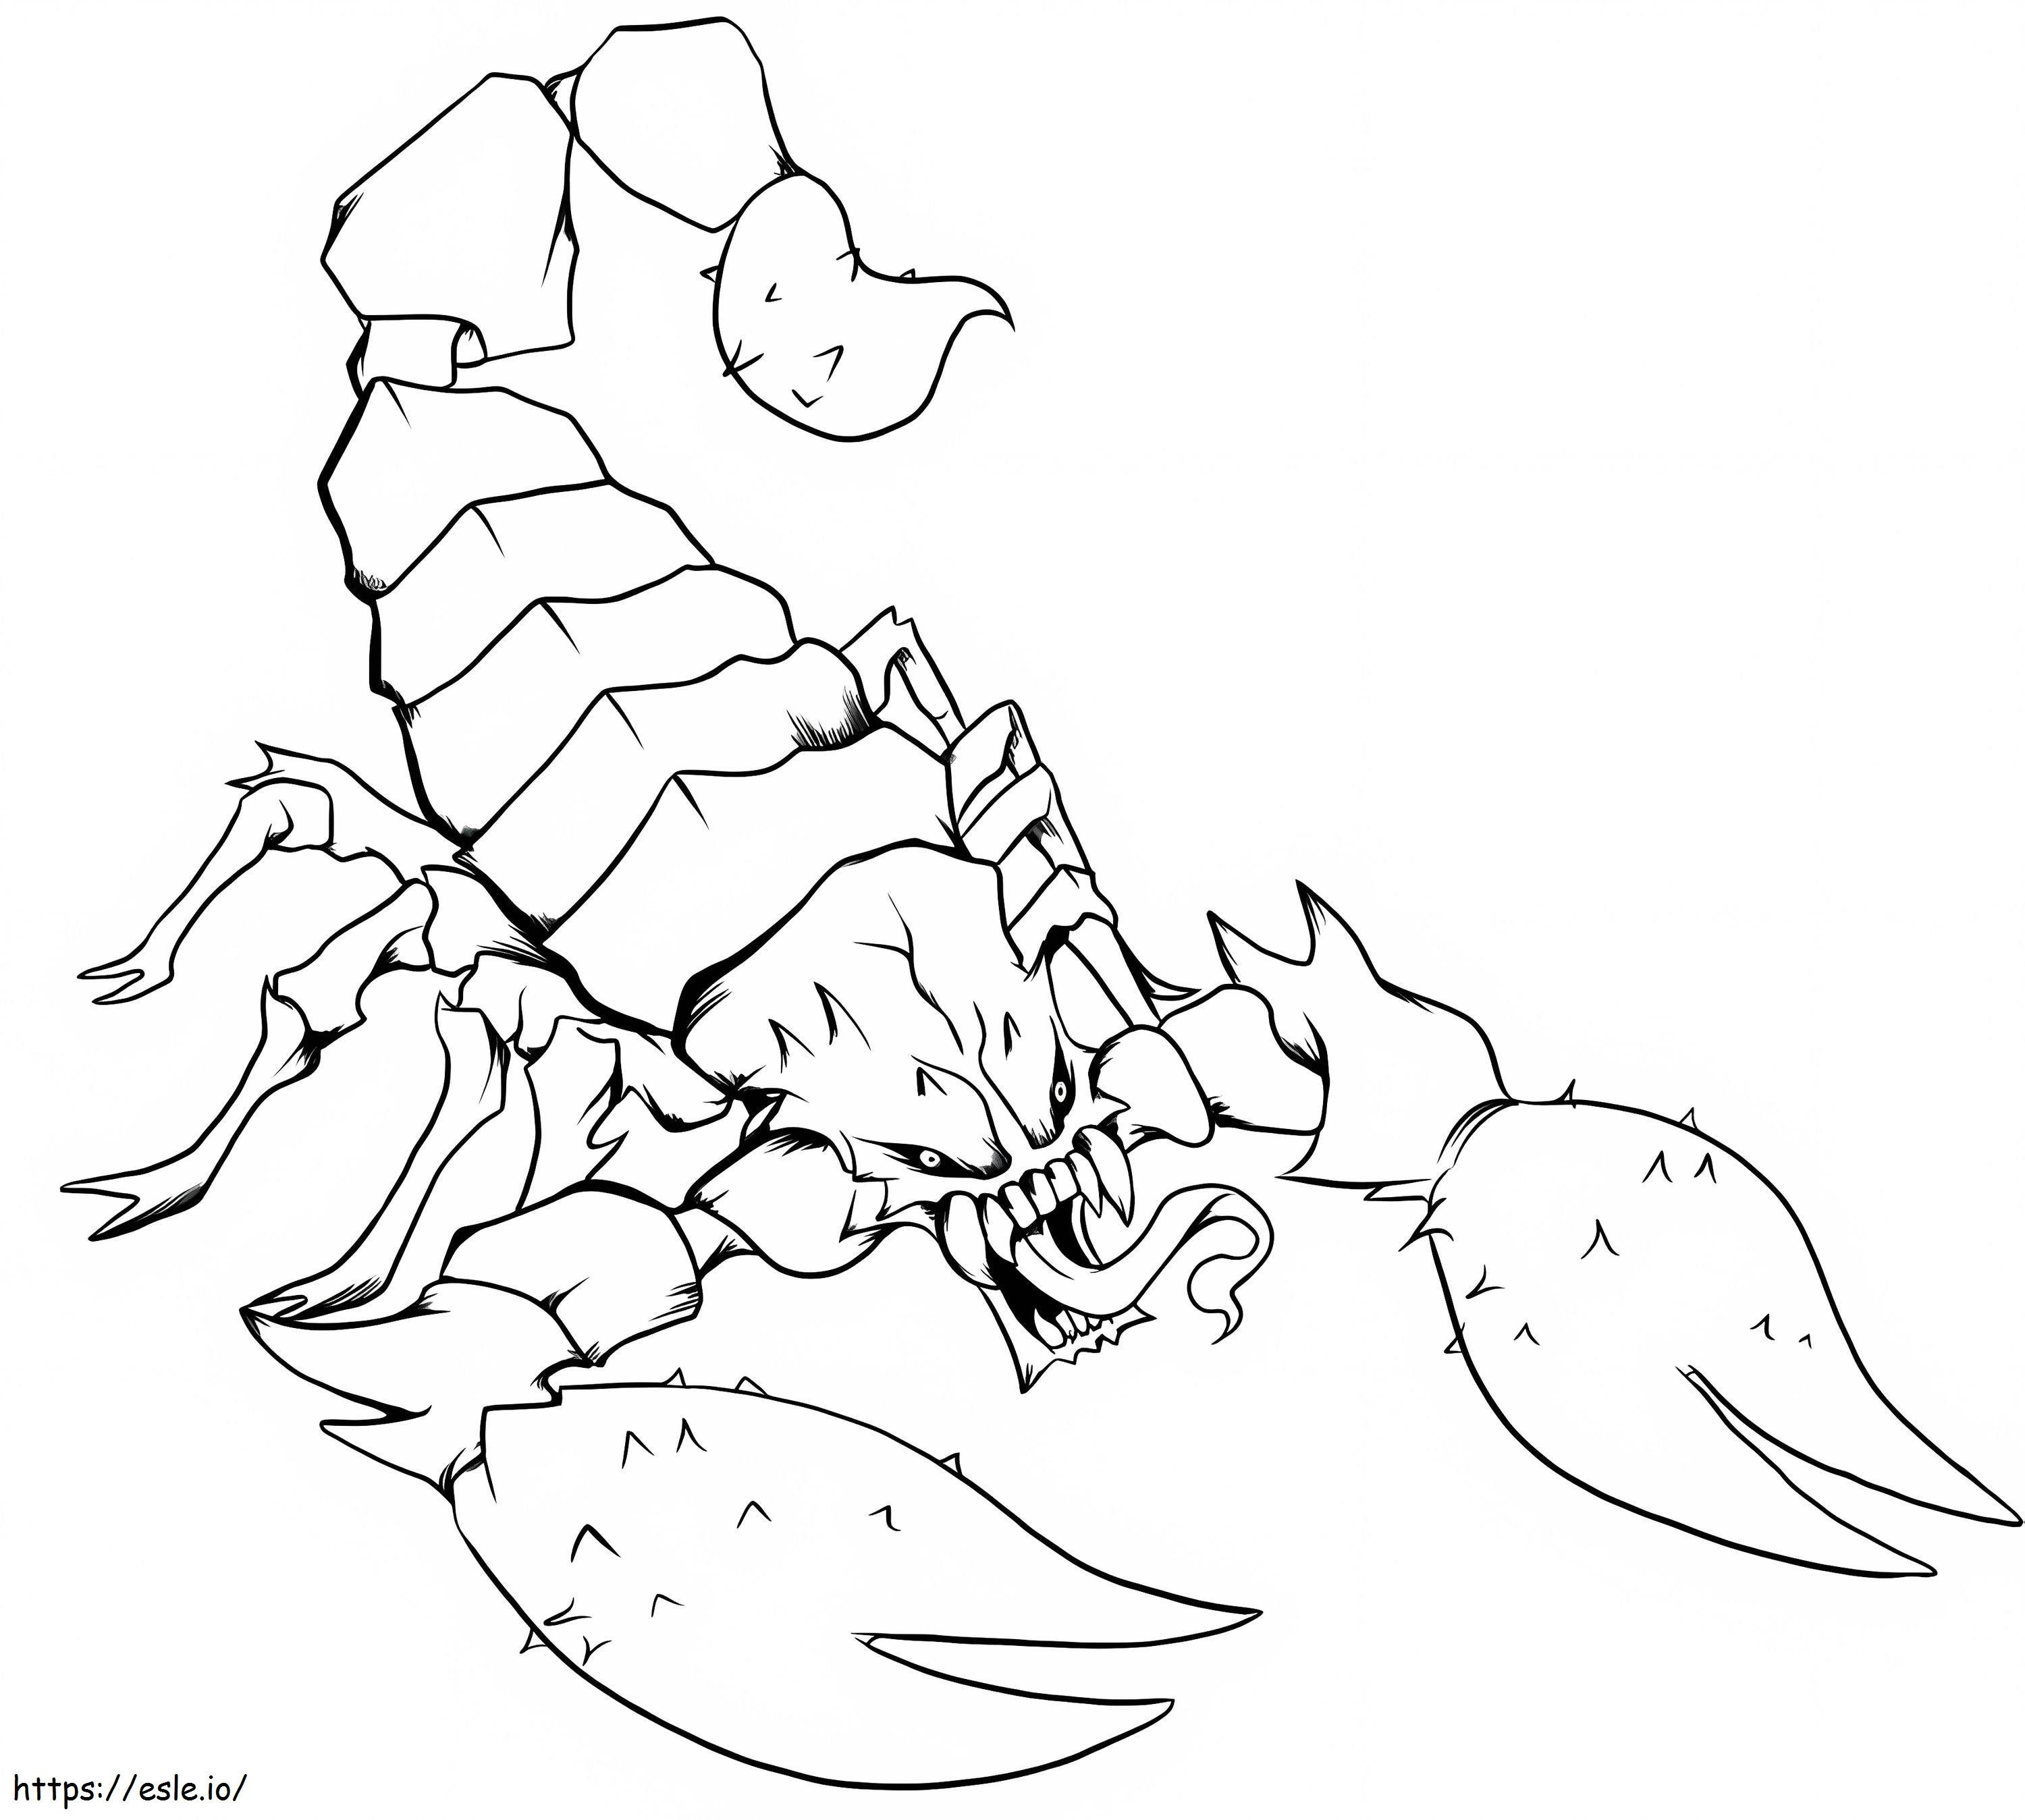 Evil Scorpion coloring page